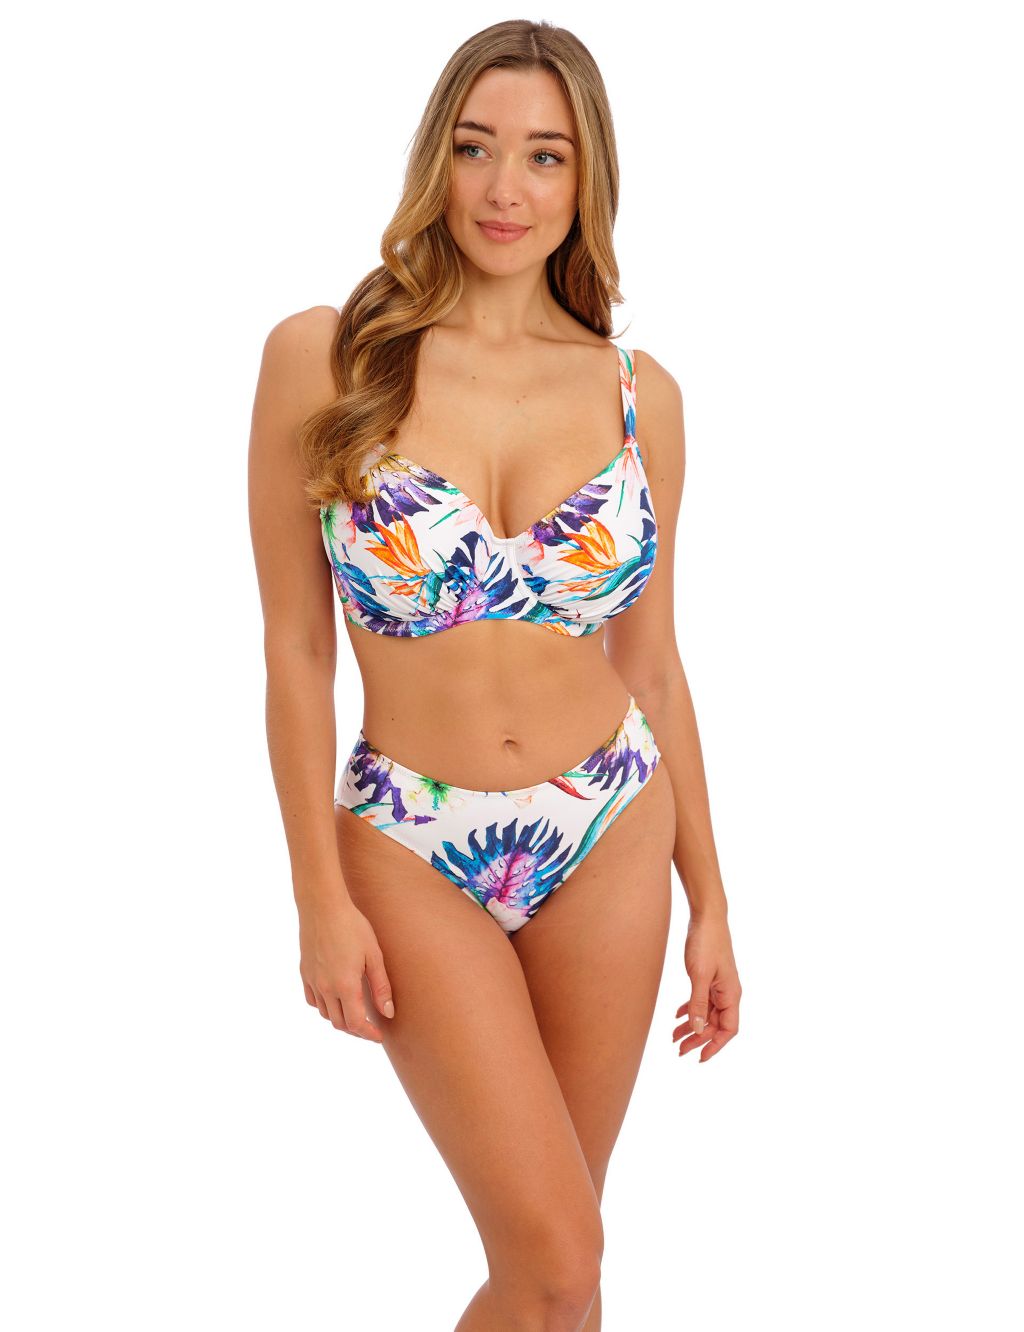 Paradiso Floral Wired Plunge Bikini Top image 5